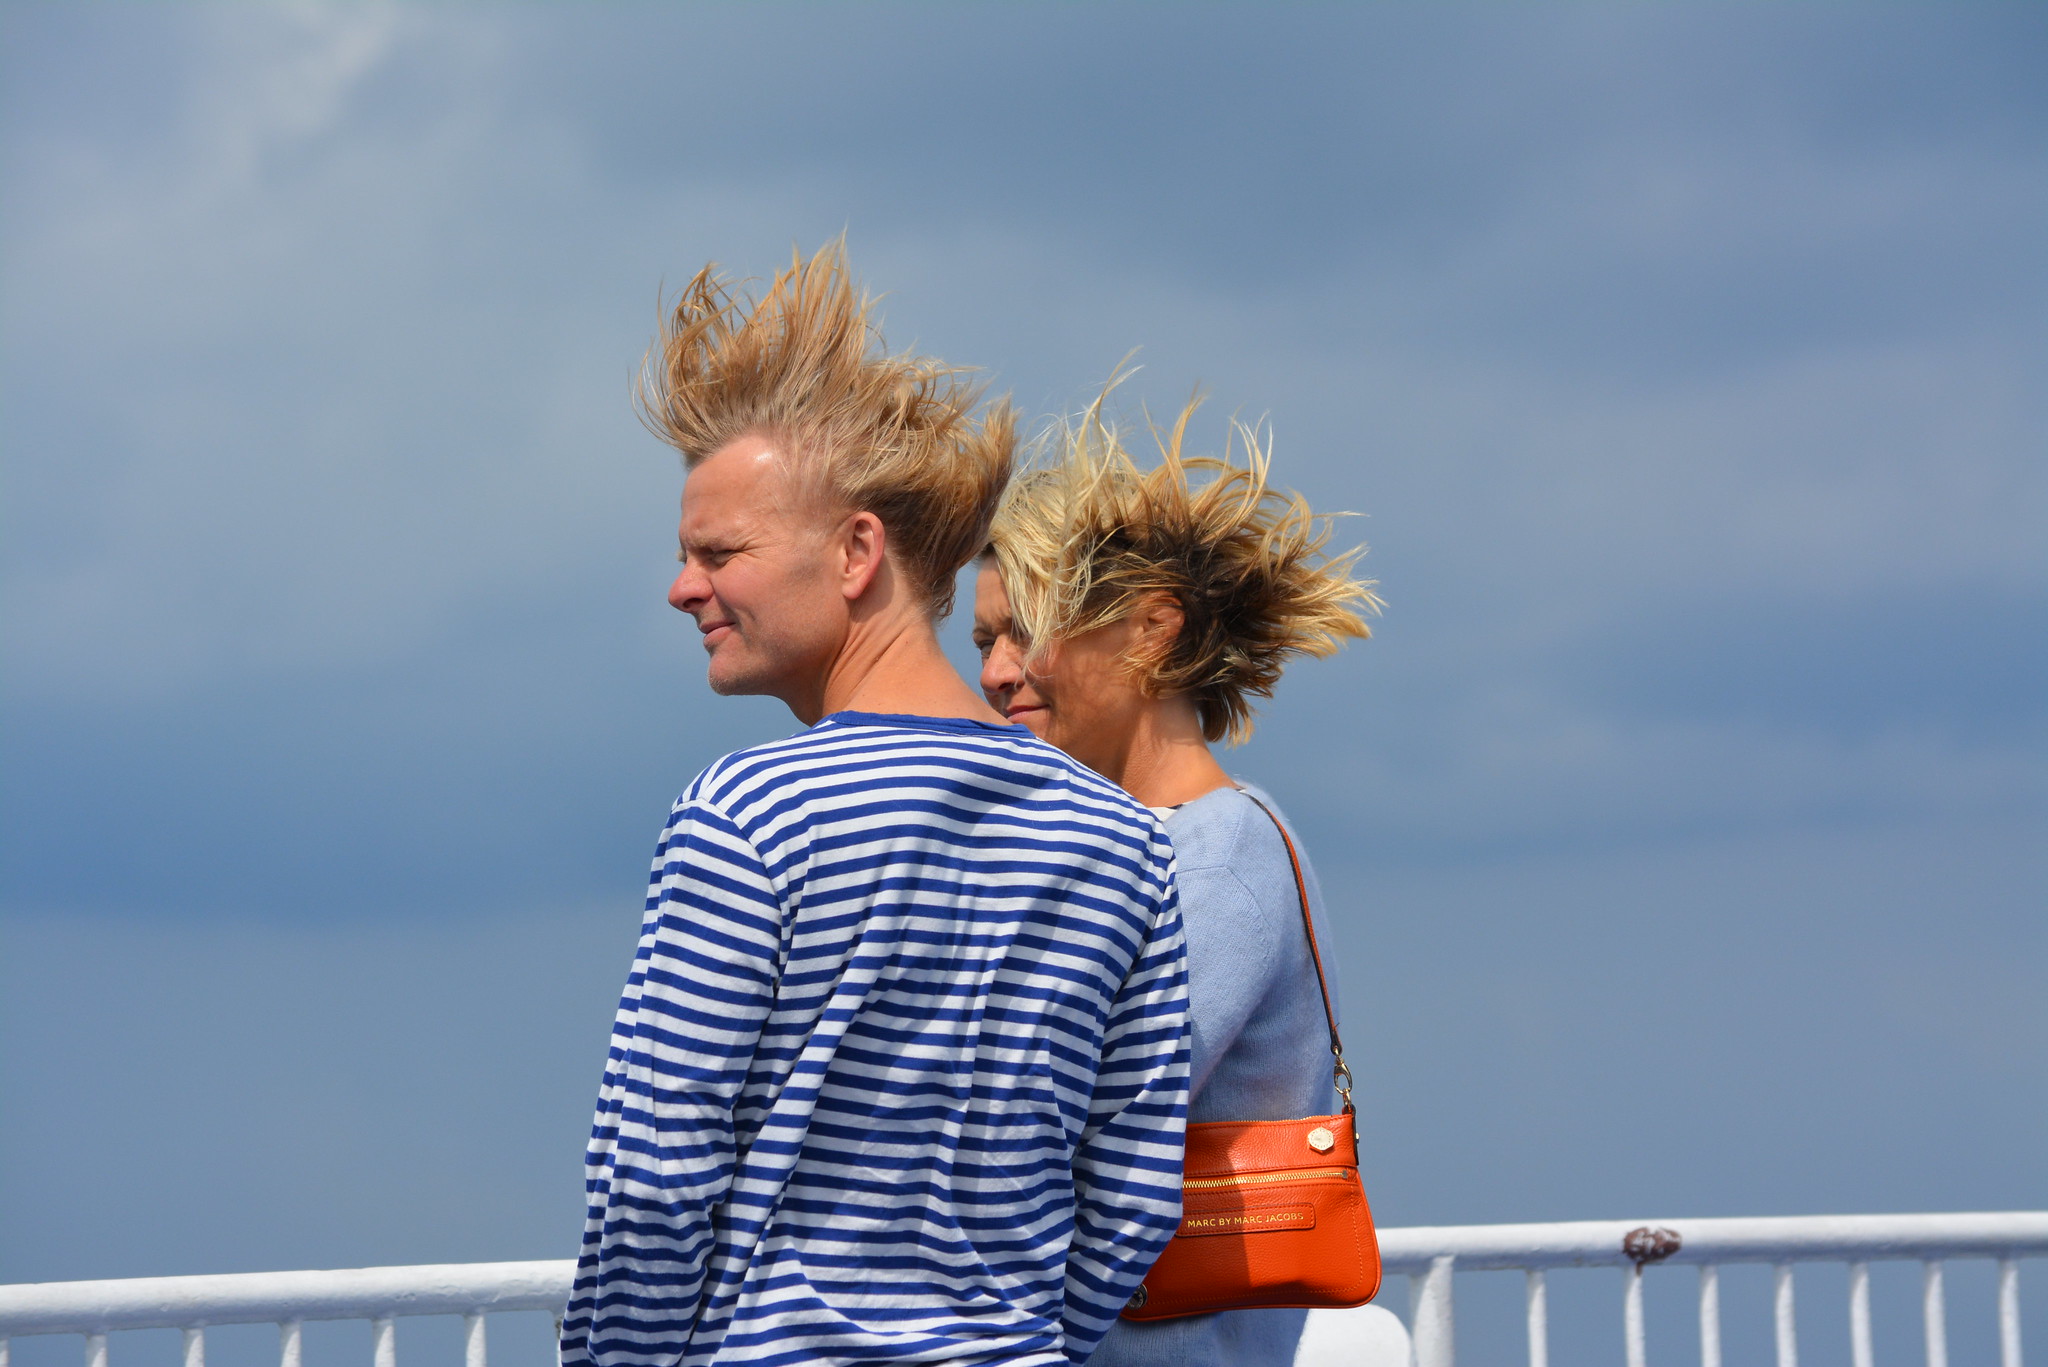 People on ferry with wind blown hair